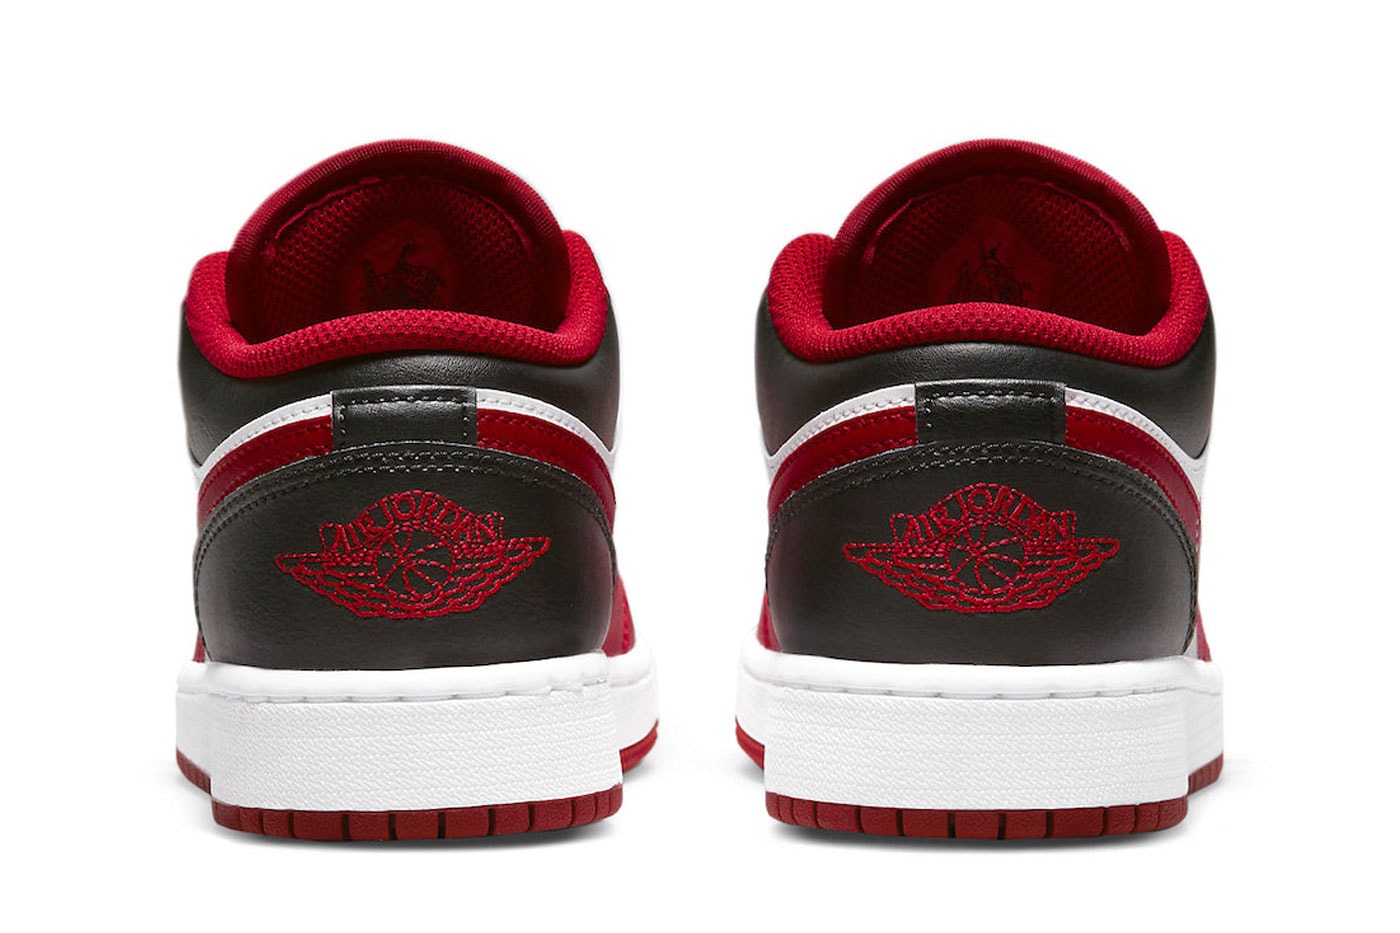 The Air Jordan 1 Low Is Dropping in Another Iteration of the Chicago Bulls Colorway nike jordan brand nba michael jordan white and red 553560-163